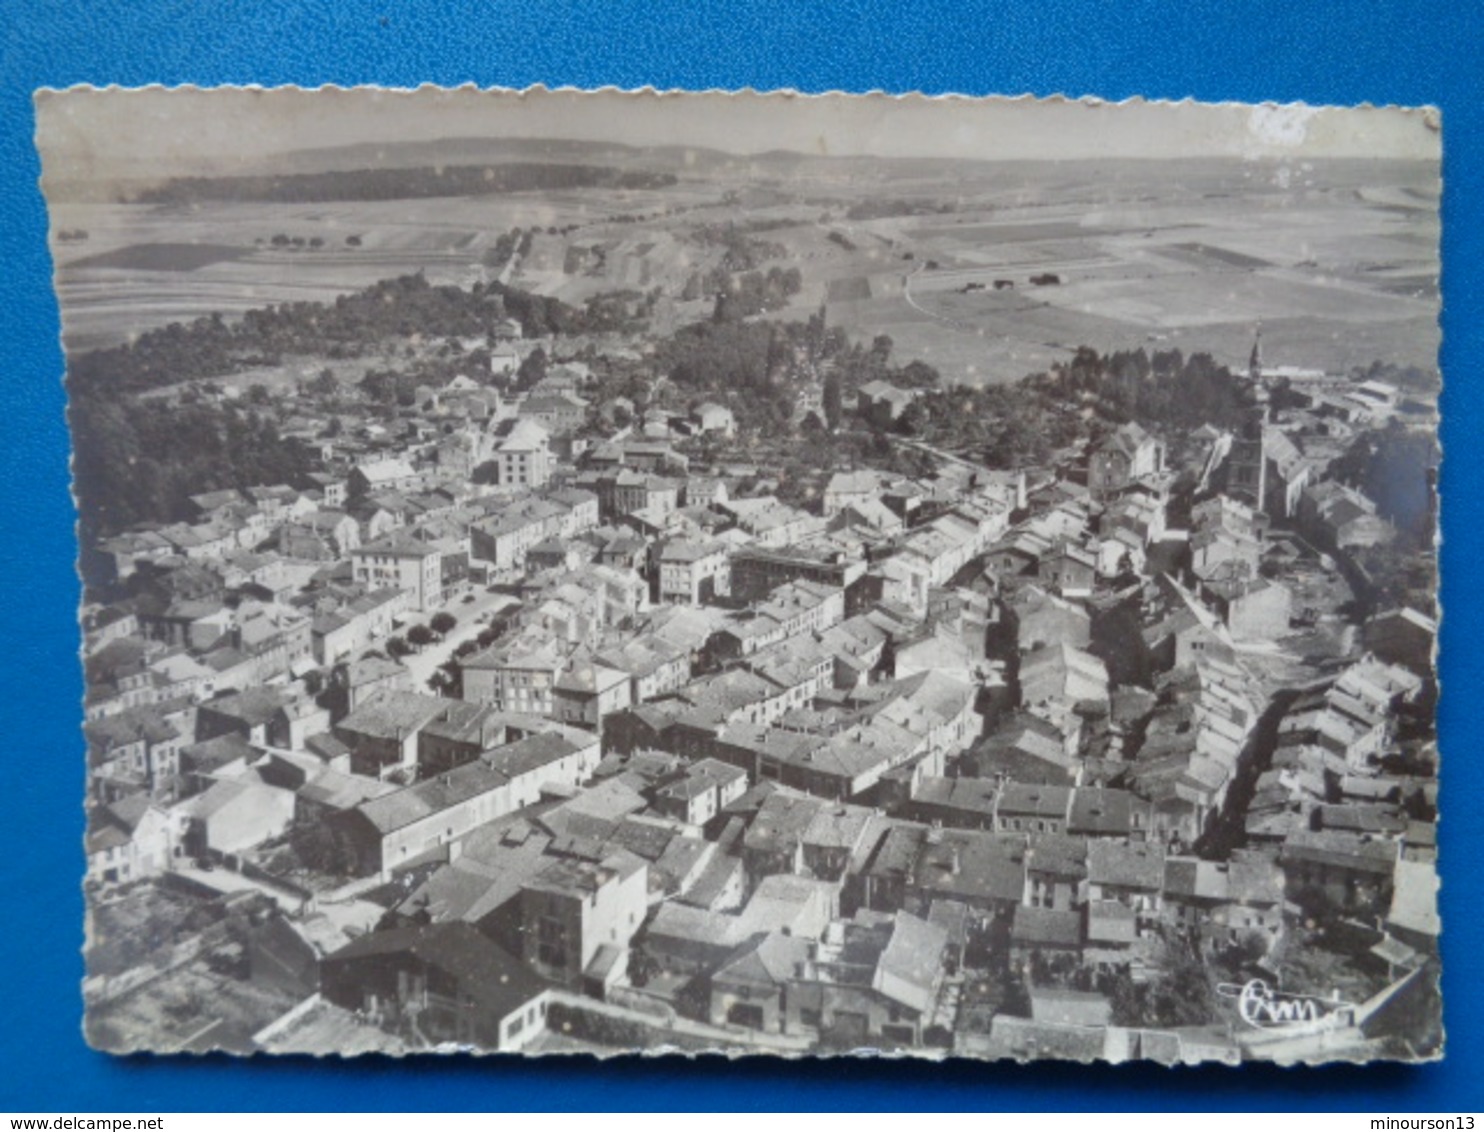 BOULAY : VUE GENERALE AERIENNE - Boulay Moselle